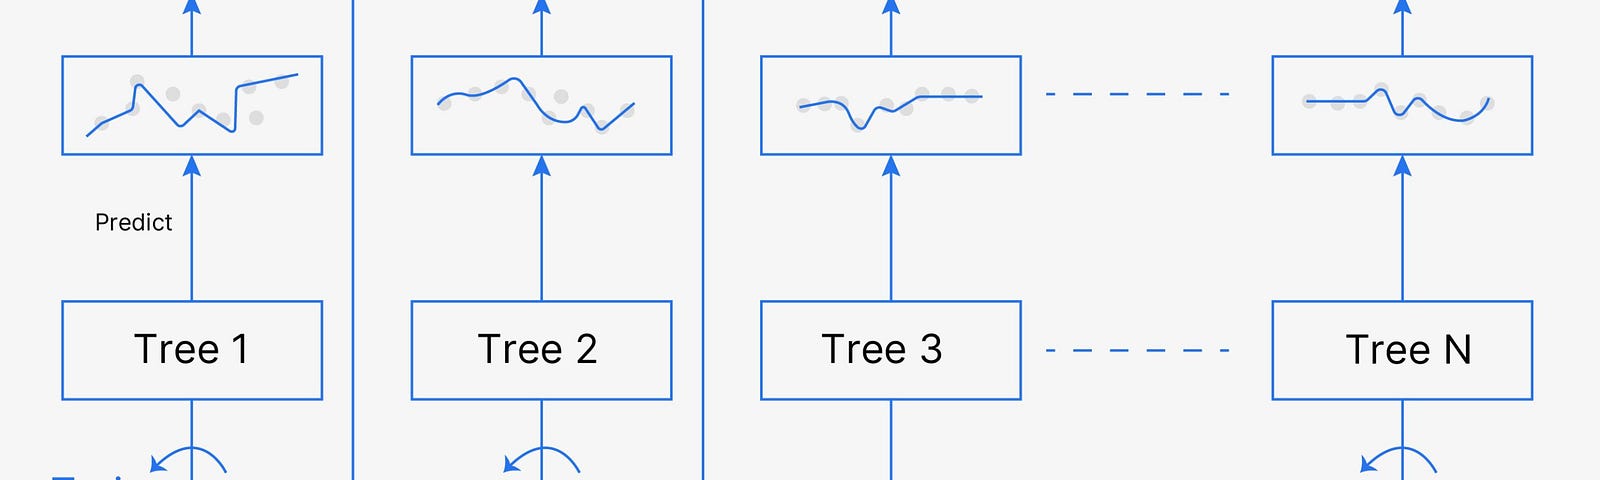 https://www.analyticsvidhya.com/blog/2021/09/gradient-boosting-algorithm-a-complete-guide-for-beginners/